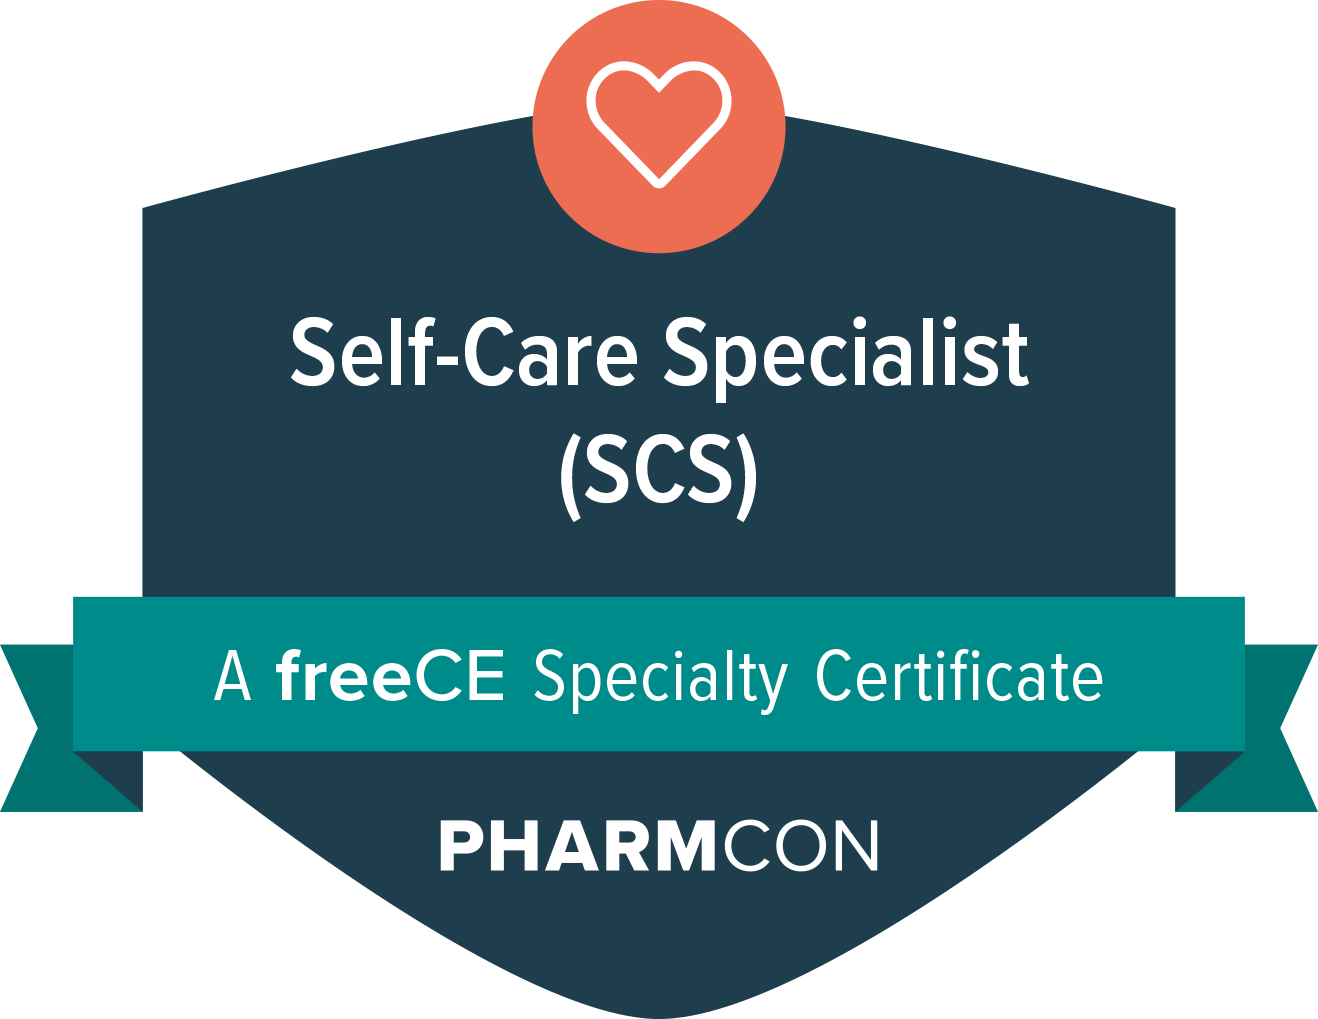 freeCE_2021-03_Certificate-Badges-Updated_Self-Care-Specialist-(SCS)_PharmCon